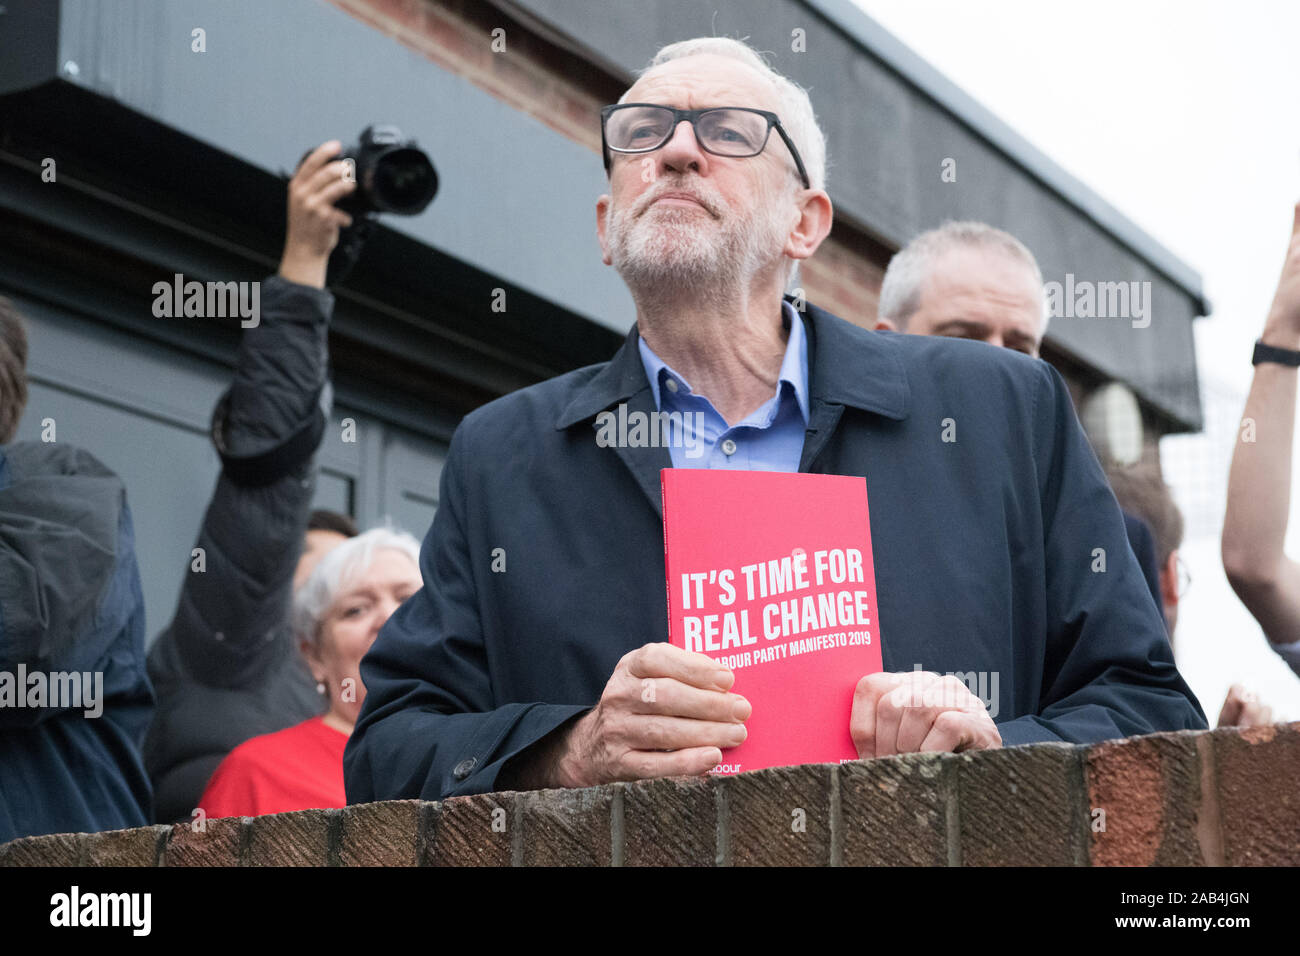 Beeston Rylands Community Centre, Broxtowe, Nottinghamshire, England, UK. 25th. November, 2019. Labour Leader Jeremy Corbyn at a Labour Party campaign rally in Broxtowe, Nottingham in support for Greg Marshall who is the Labour Party Parliamentary Candidate for Broxtowe at the of start 2019 election campaign. This Parliamentary seat which was won by Anna Soubry for the Conservative Party by a close margin of 863 votes and now standing as an for the Independent Group.Credit: AlanBeastall/Alamy Live News Stock Photo